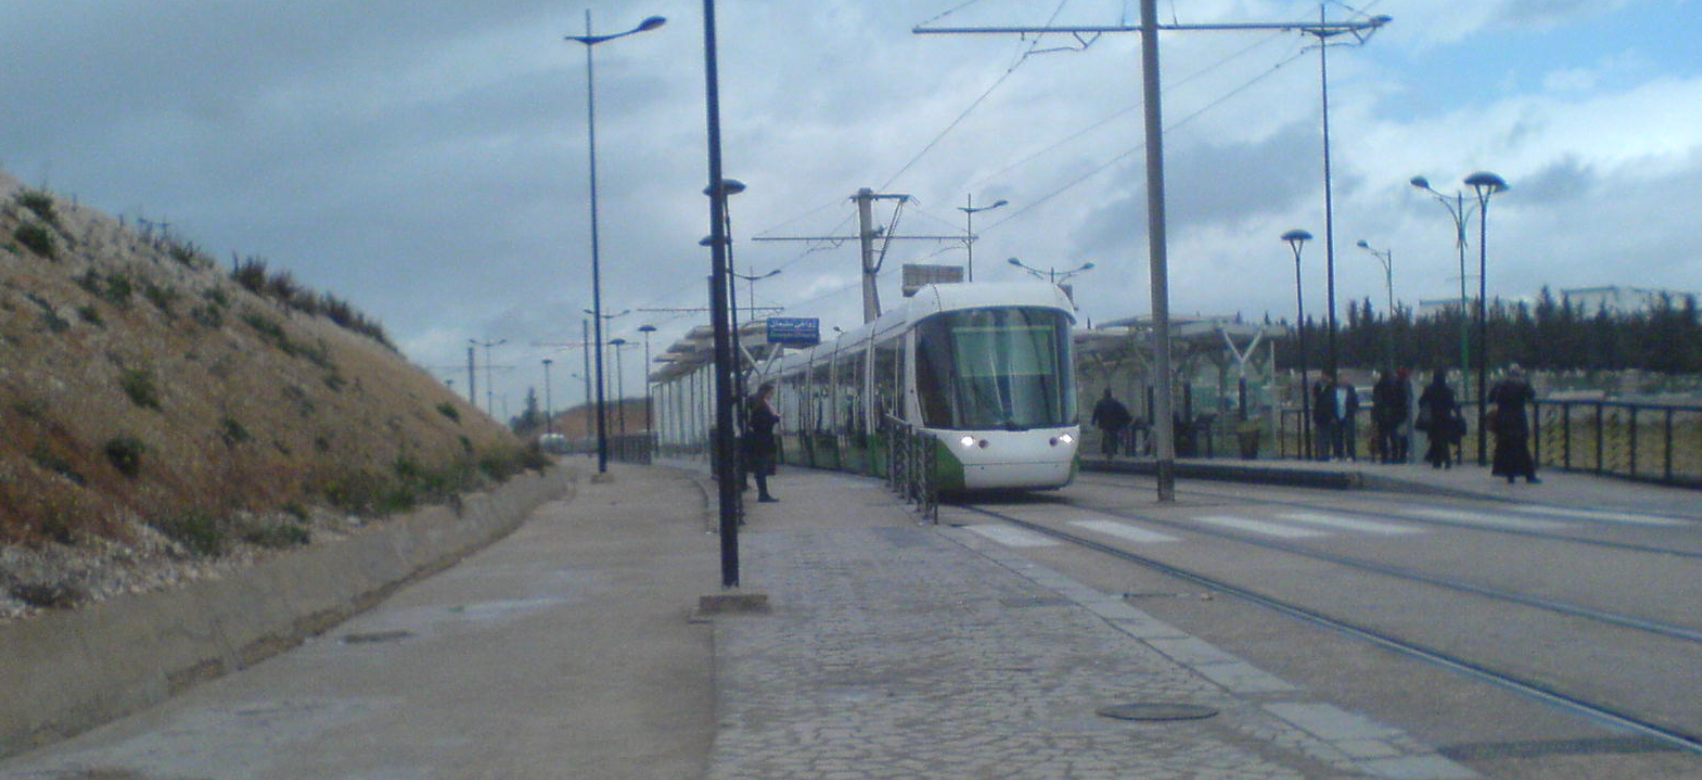 Algeria: The extension of the Constantine tram line officially inaugurated. It connects the old to the new city